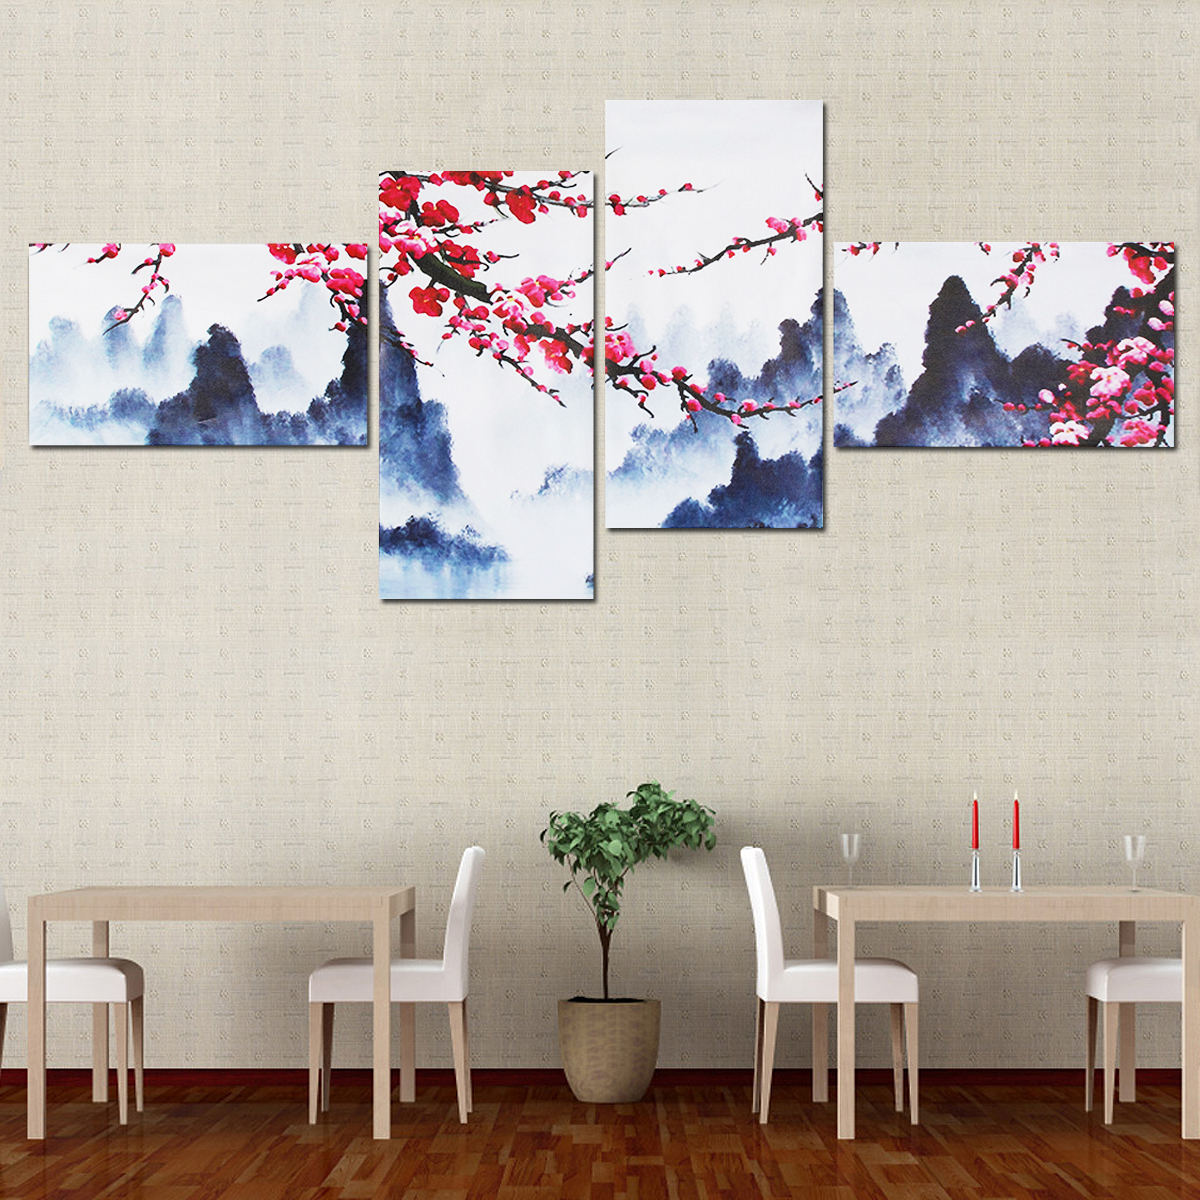 4-Pcs-Wall-Decorative-Painting-Modern-Abstract-Wall-Decor-Plum-Blossom-Art-Pictures-Canvas-Prints-Ho-1319561-5